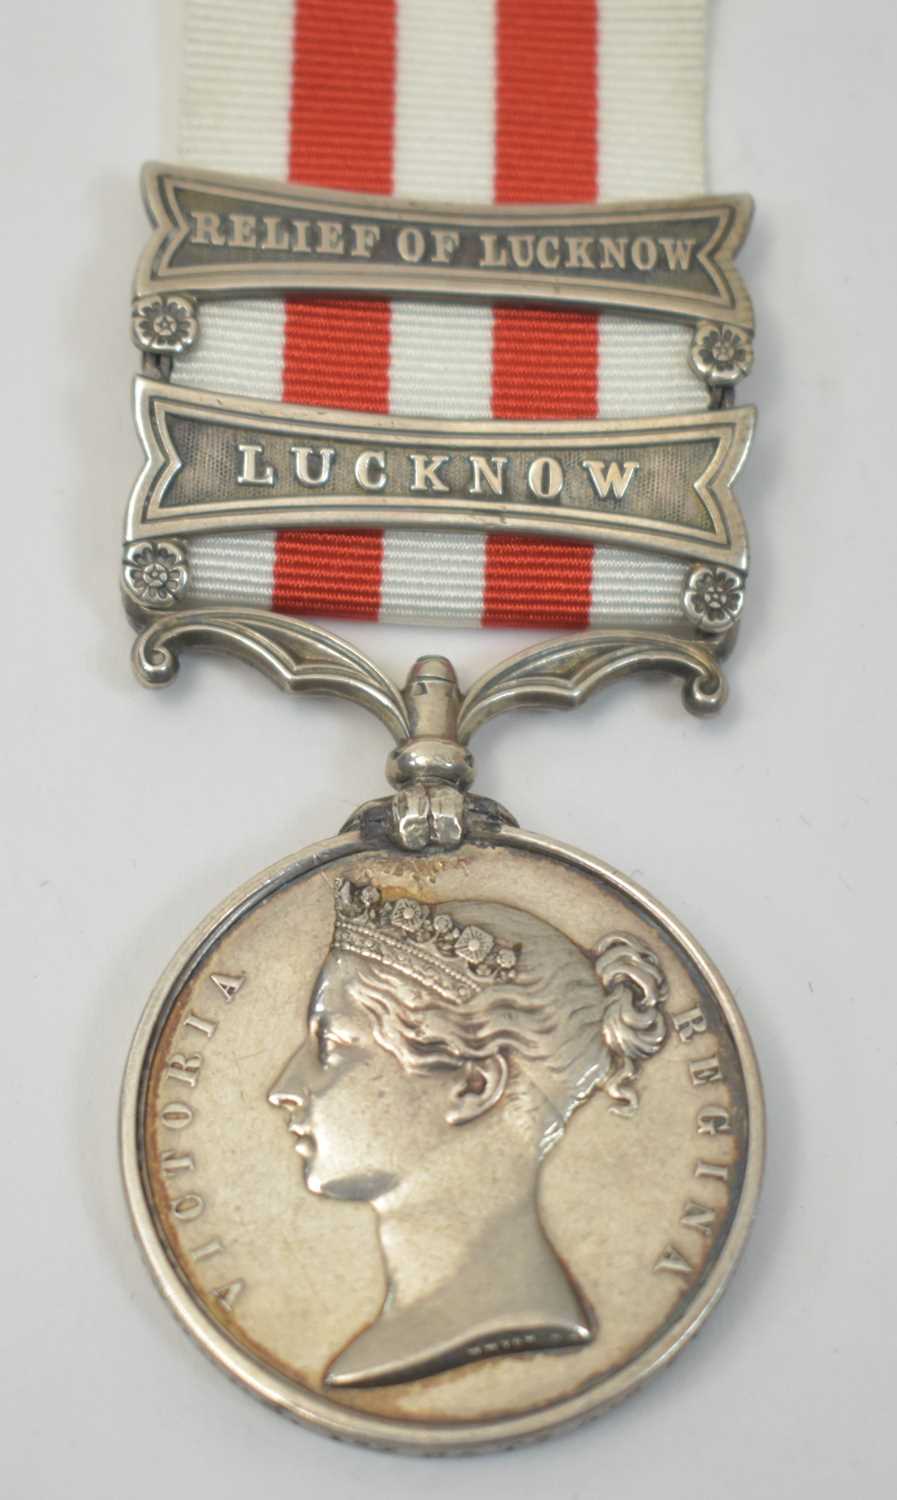 Lot 252 - Indian Mutiny Medal